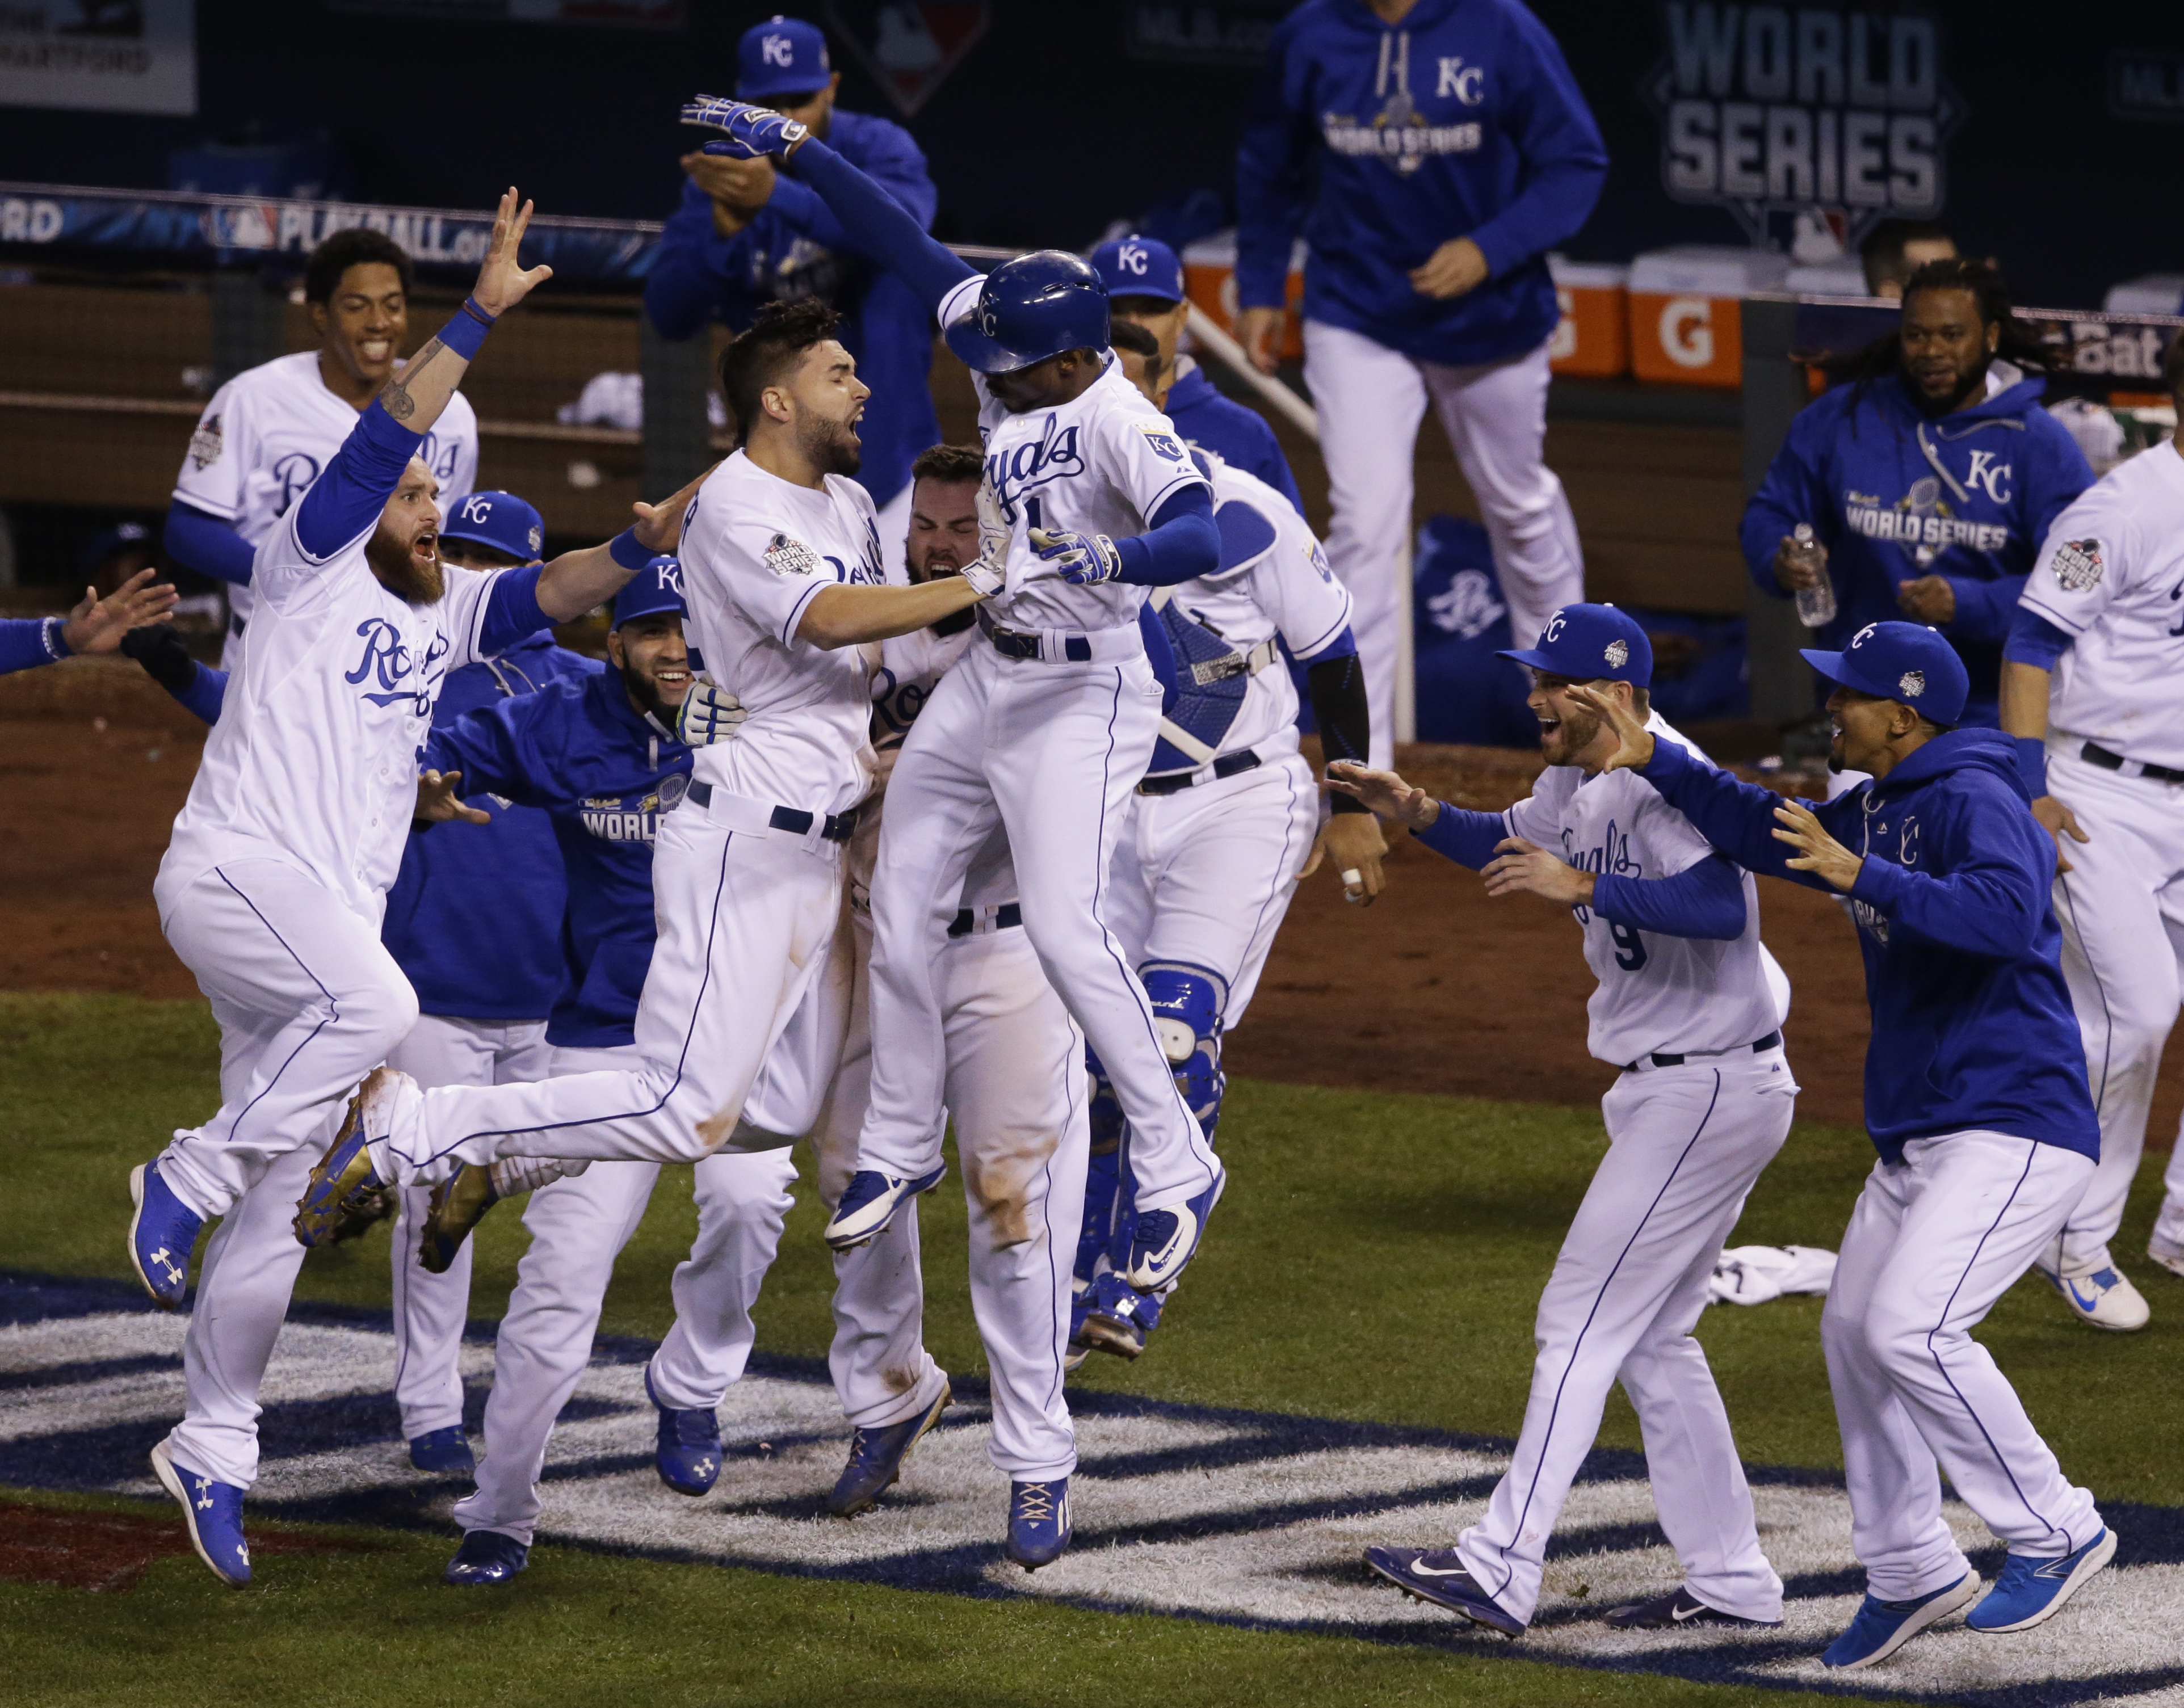 New York Mets face Royals in World Series opener in Kansas City on Tuesday